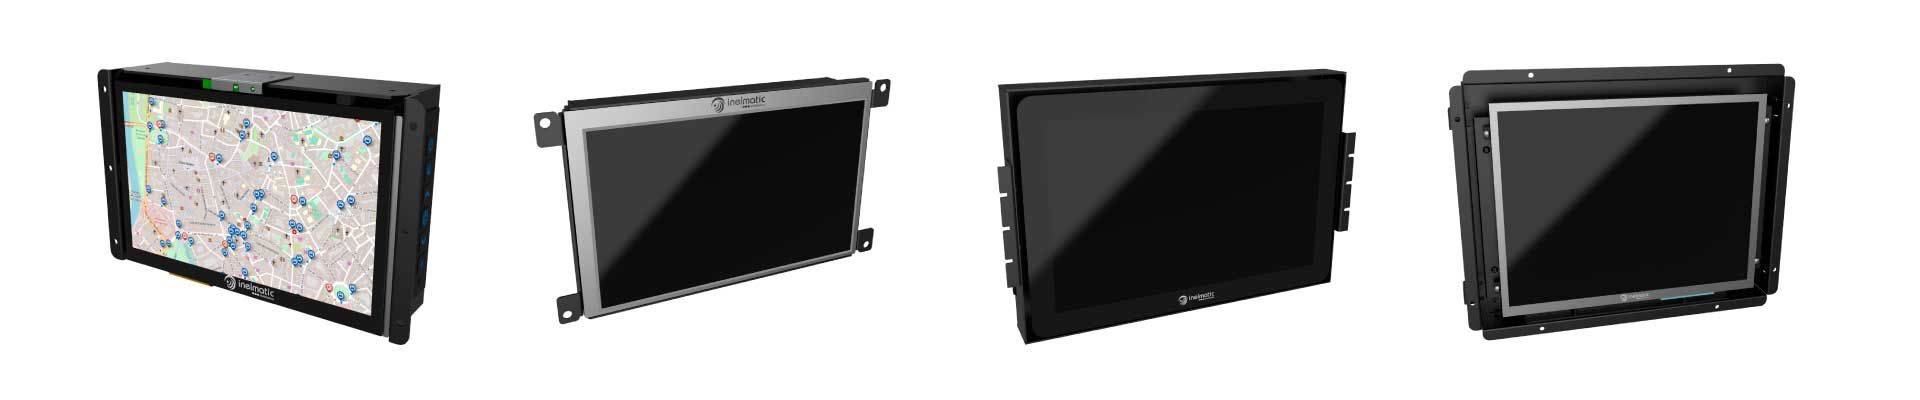 Industrial open frame and panel mount displays - Inelmatic